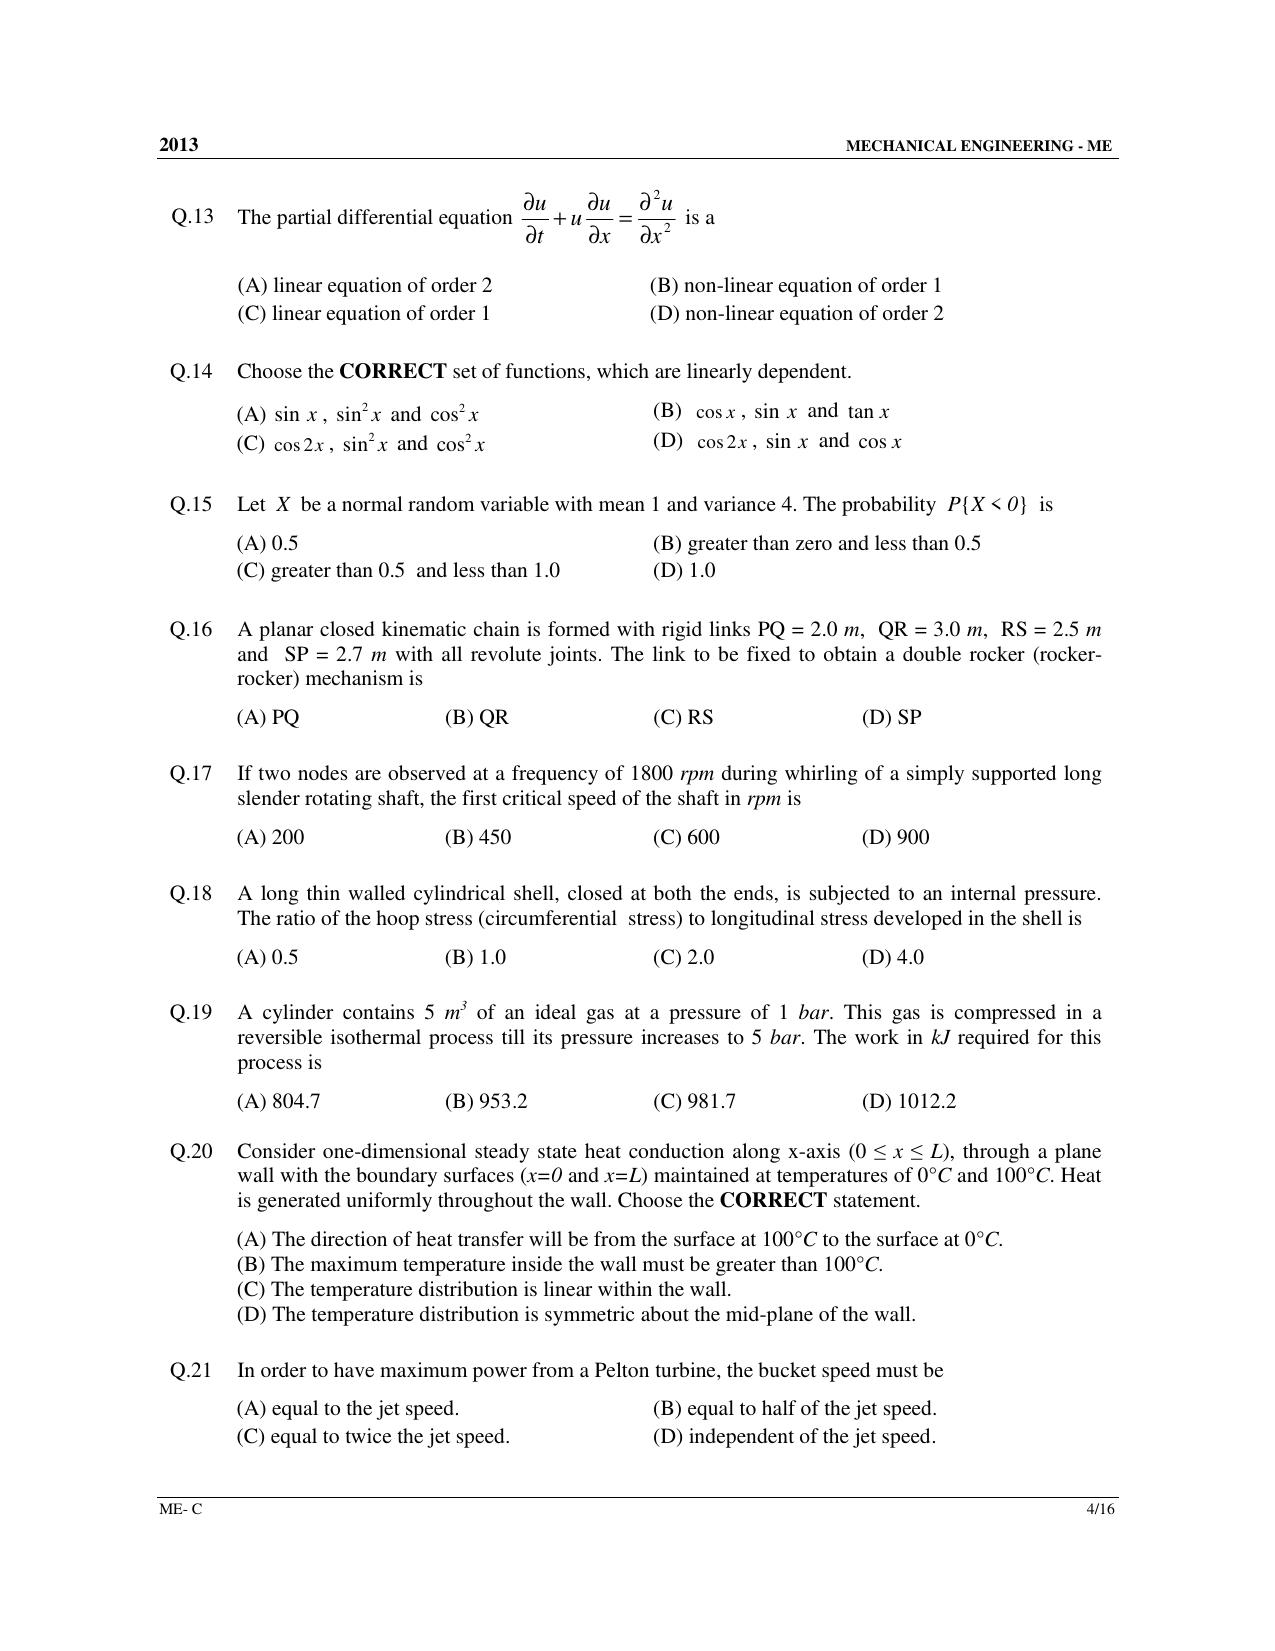 GATE 2013 Mechanical Engineering (ME) Question Paper with Answer Key - Page 33